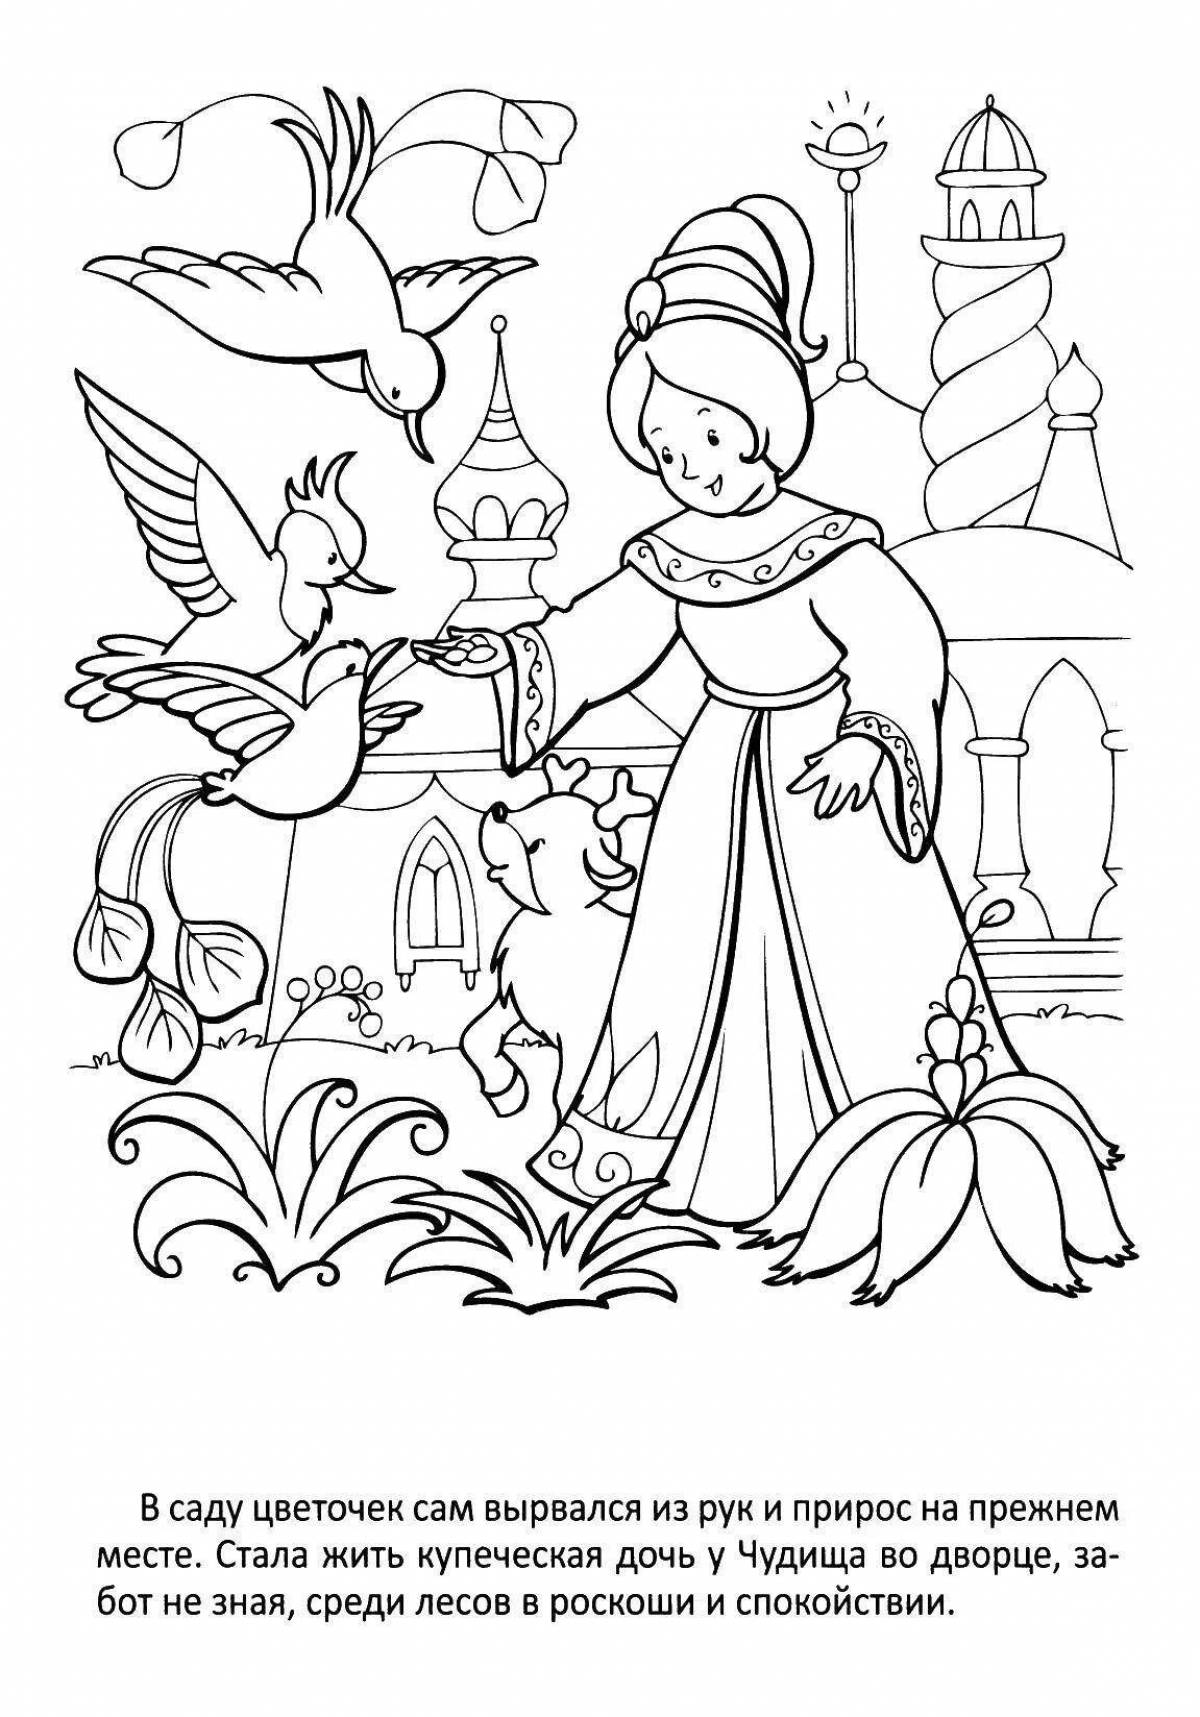 Colorful coloring book based on Pushkin's fairy tales in kindergarten